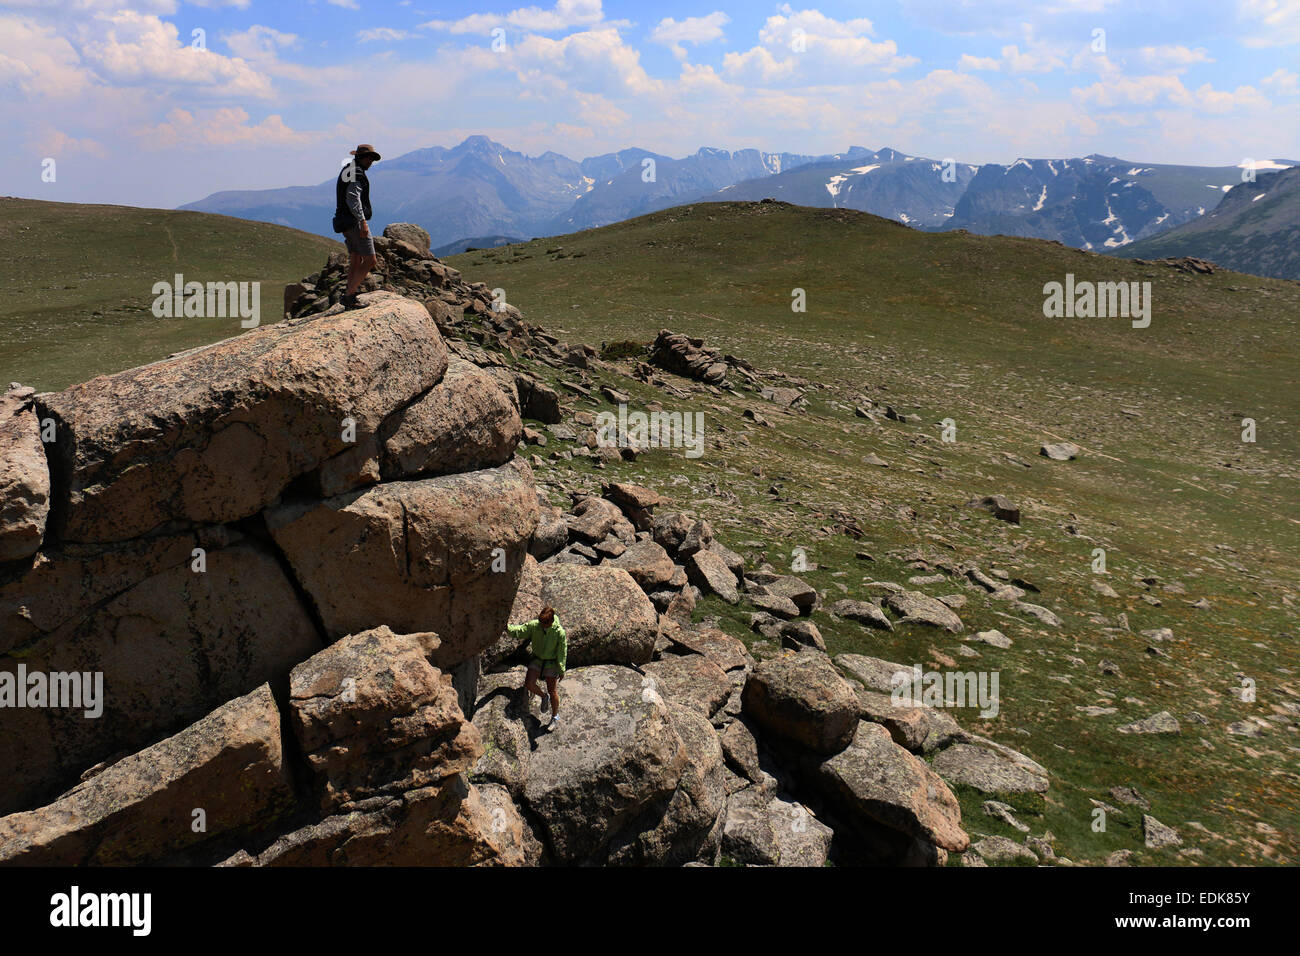 hikers bouldering on weathered granite cliff Rocky Mountain National Park Colorado Stock Photo